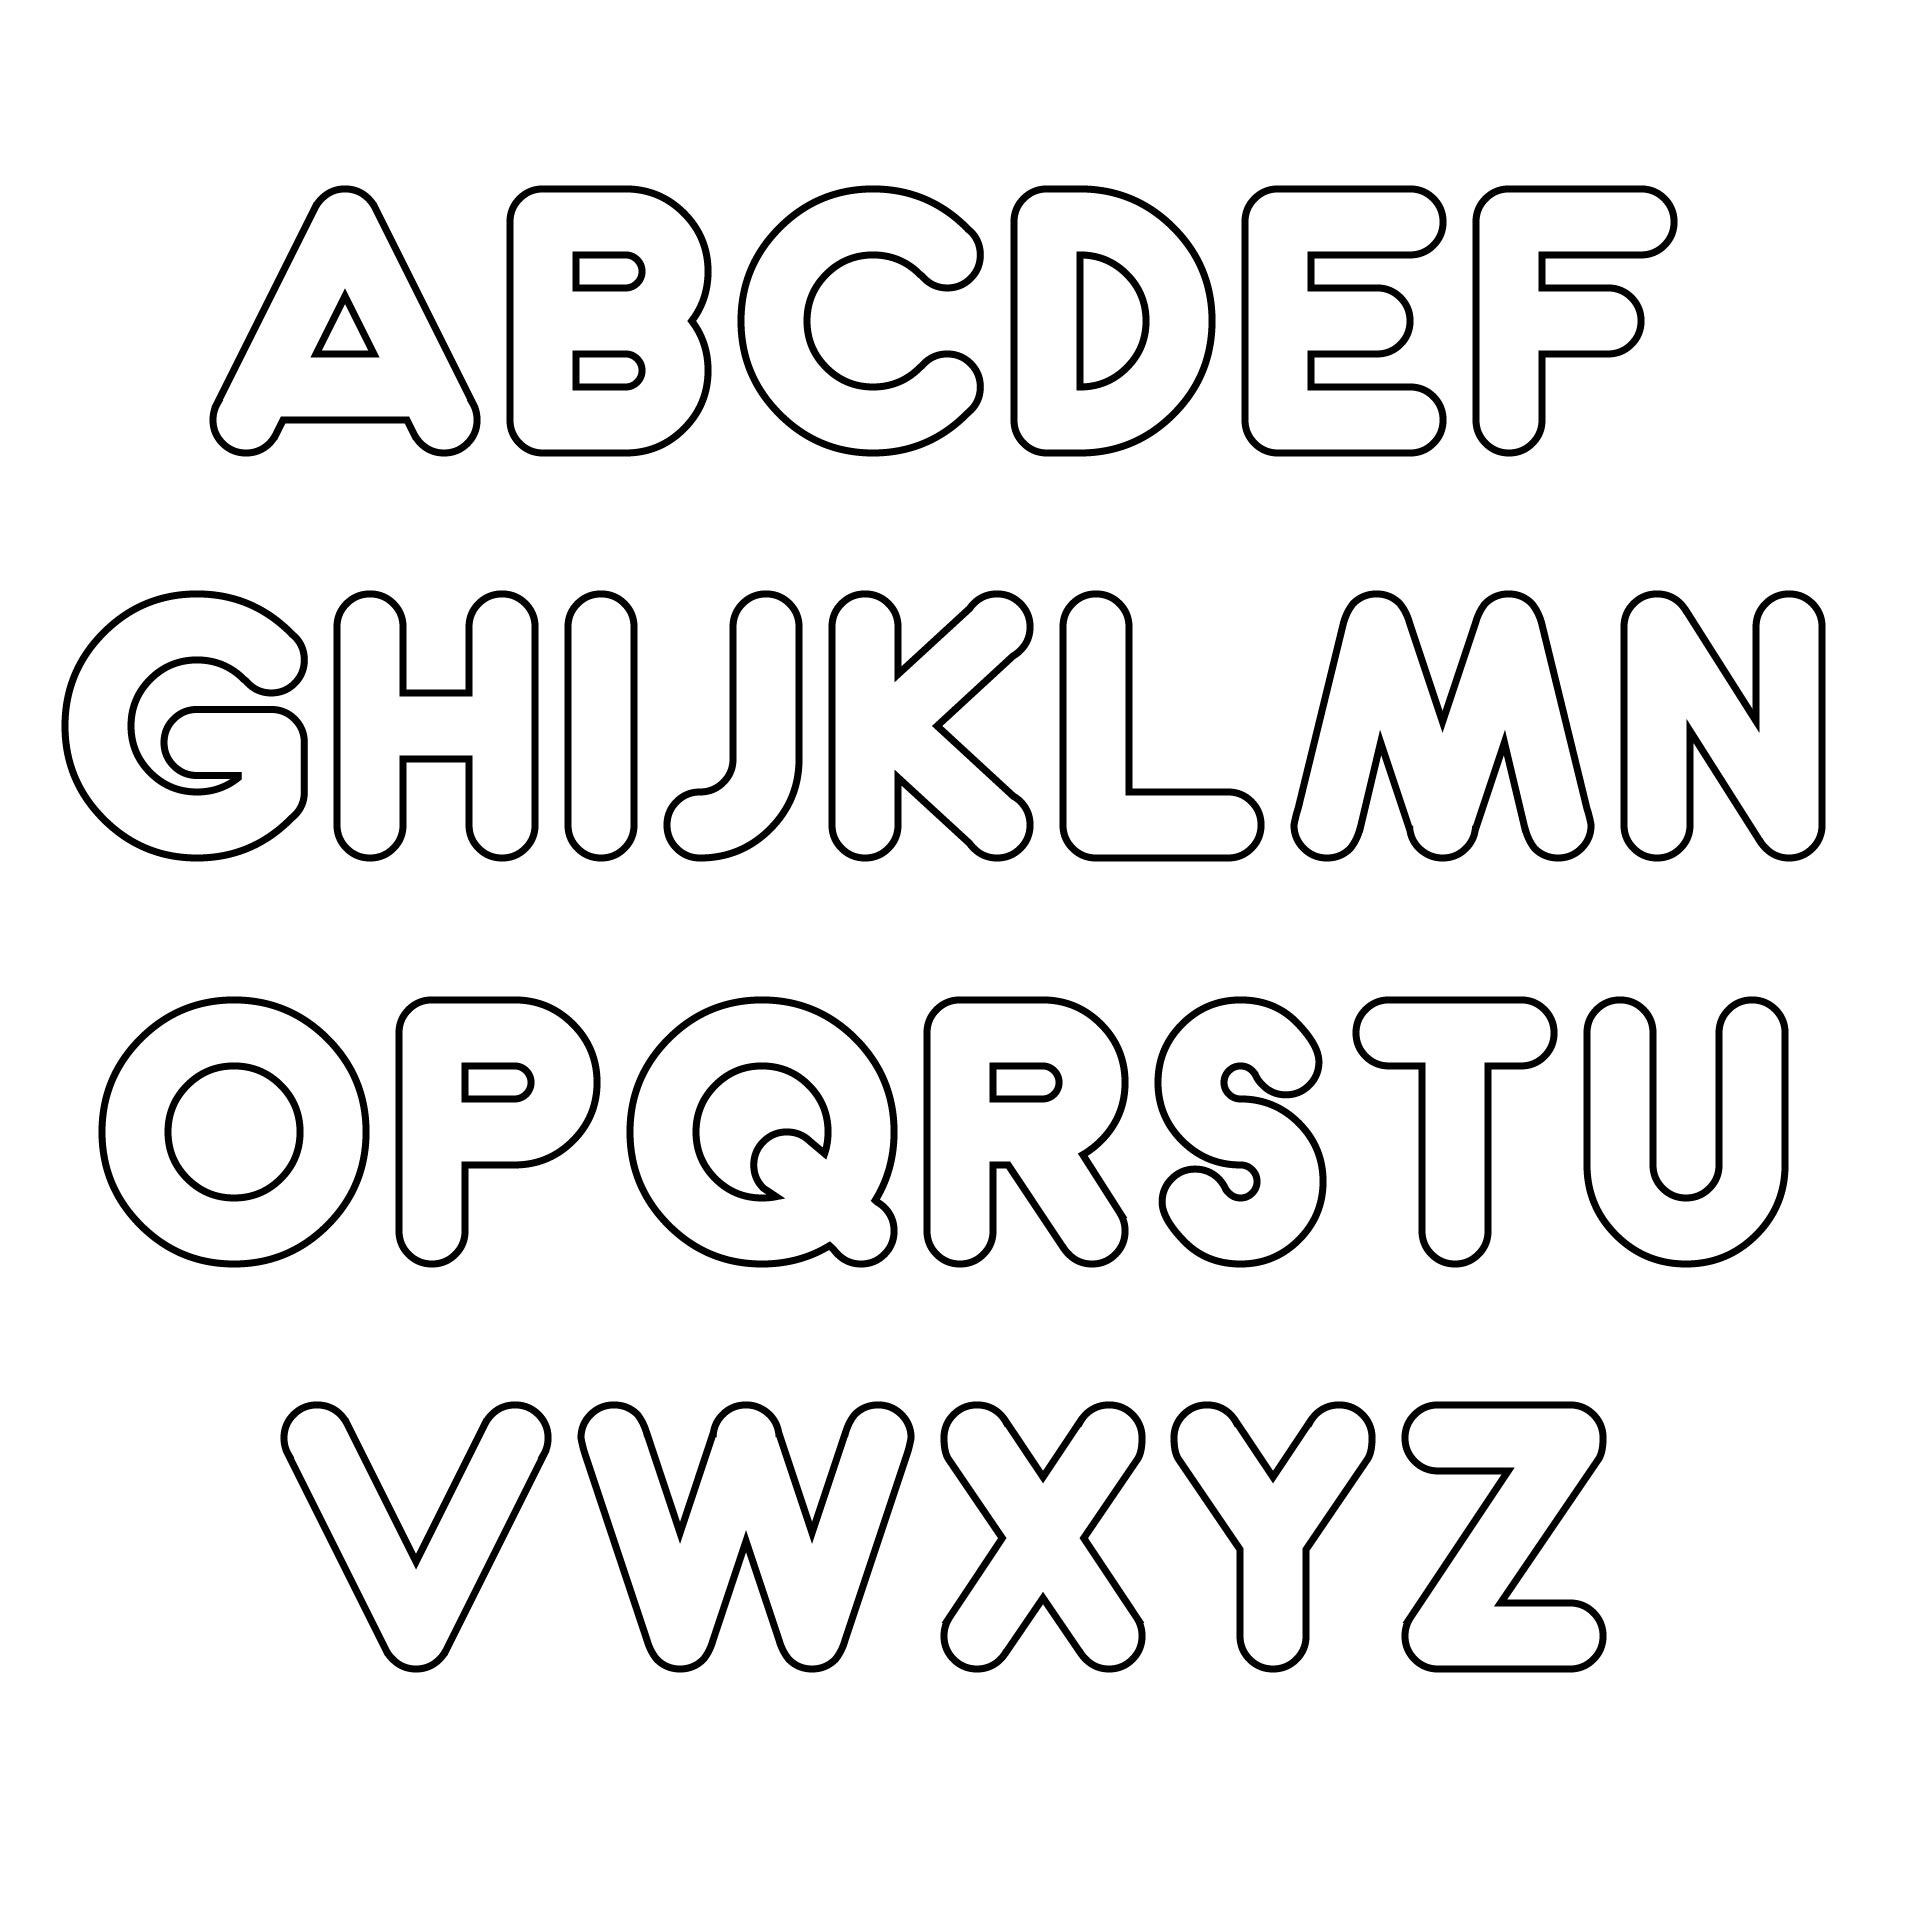 Free Stencil Letters To Print And Cut Out